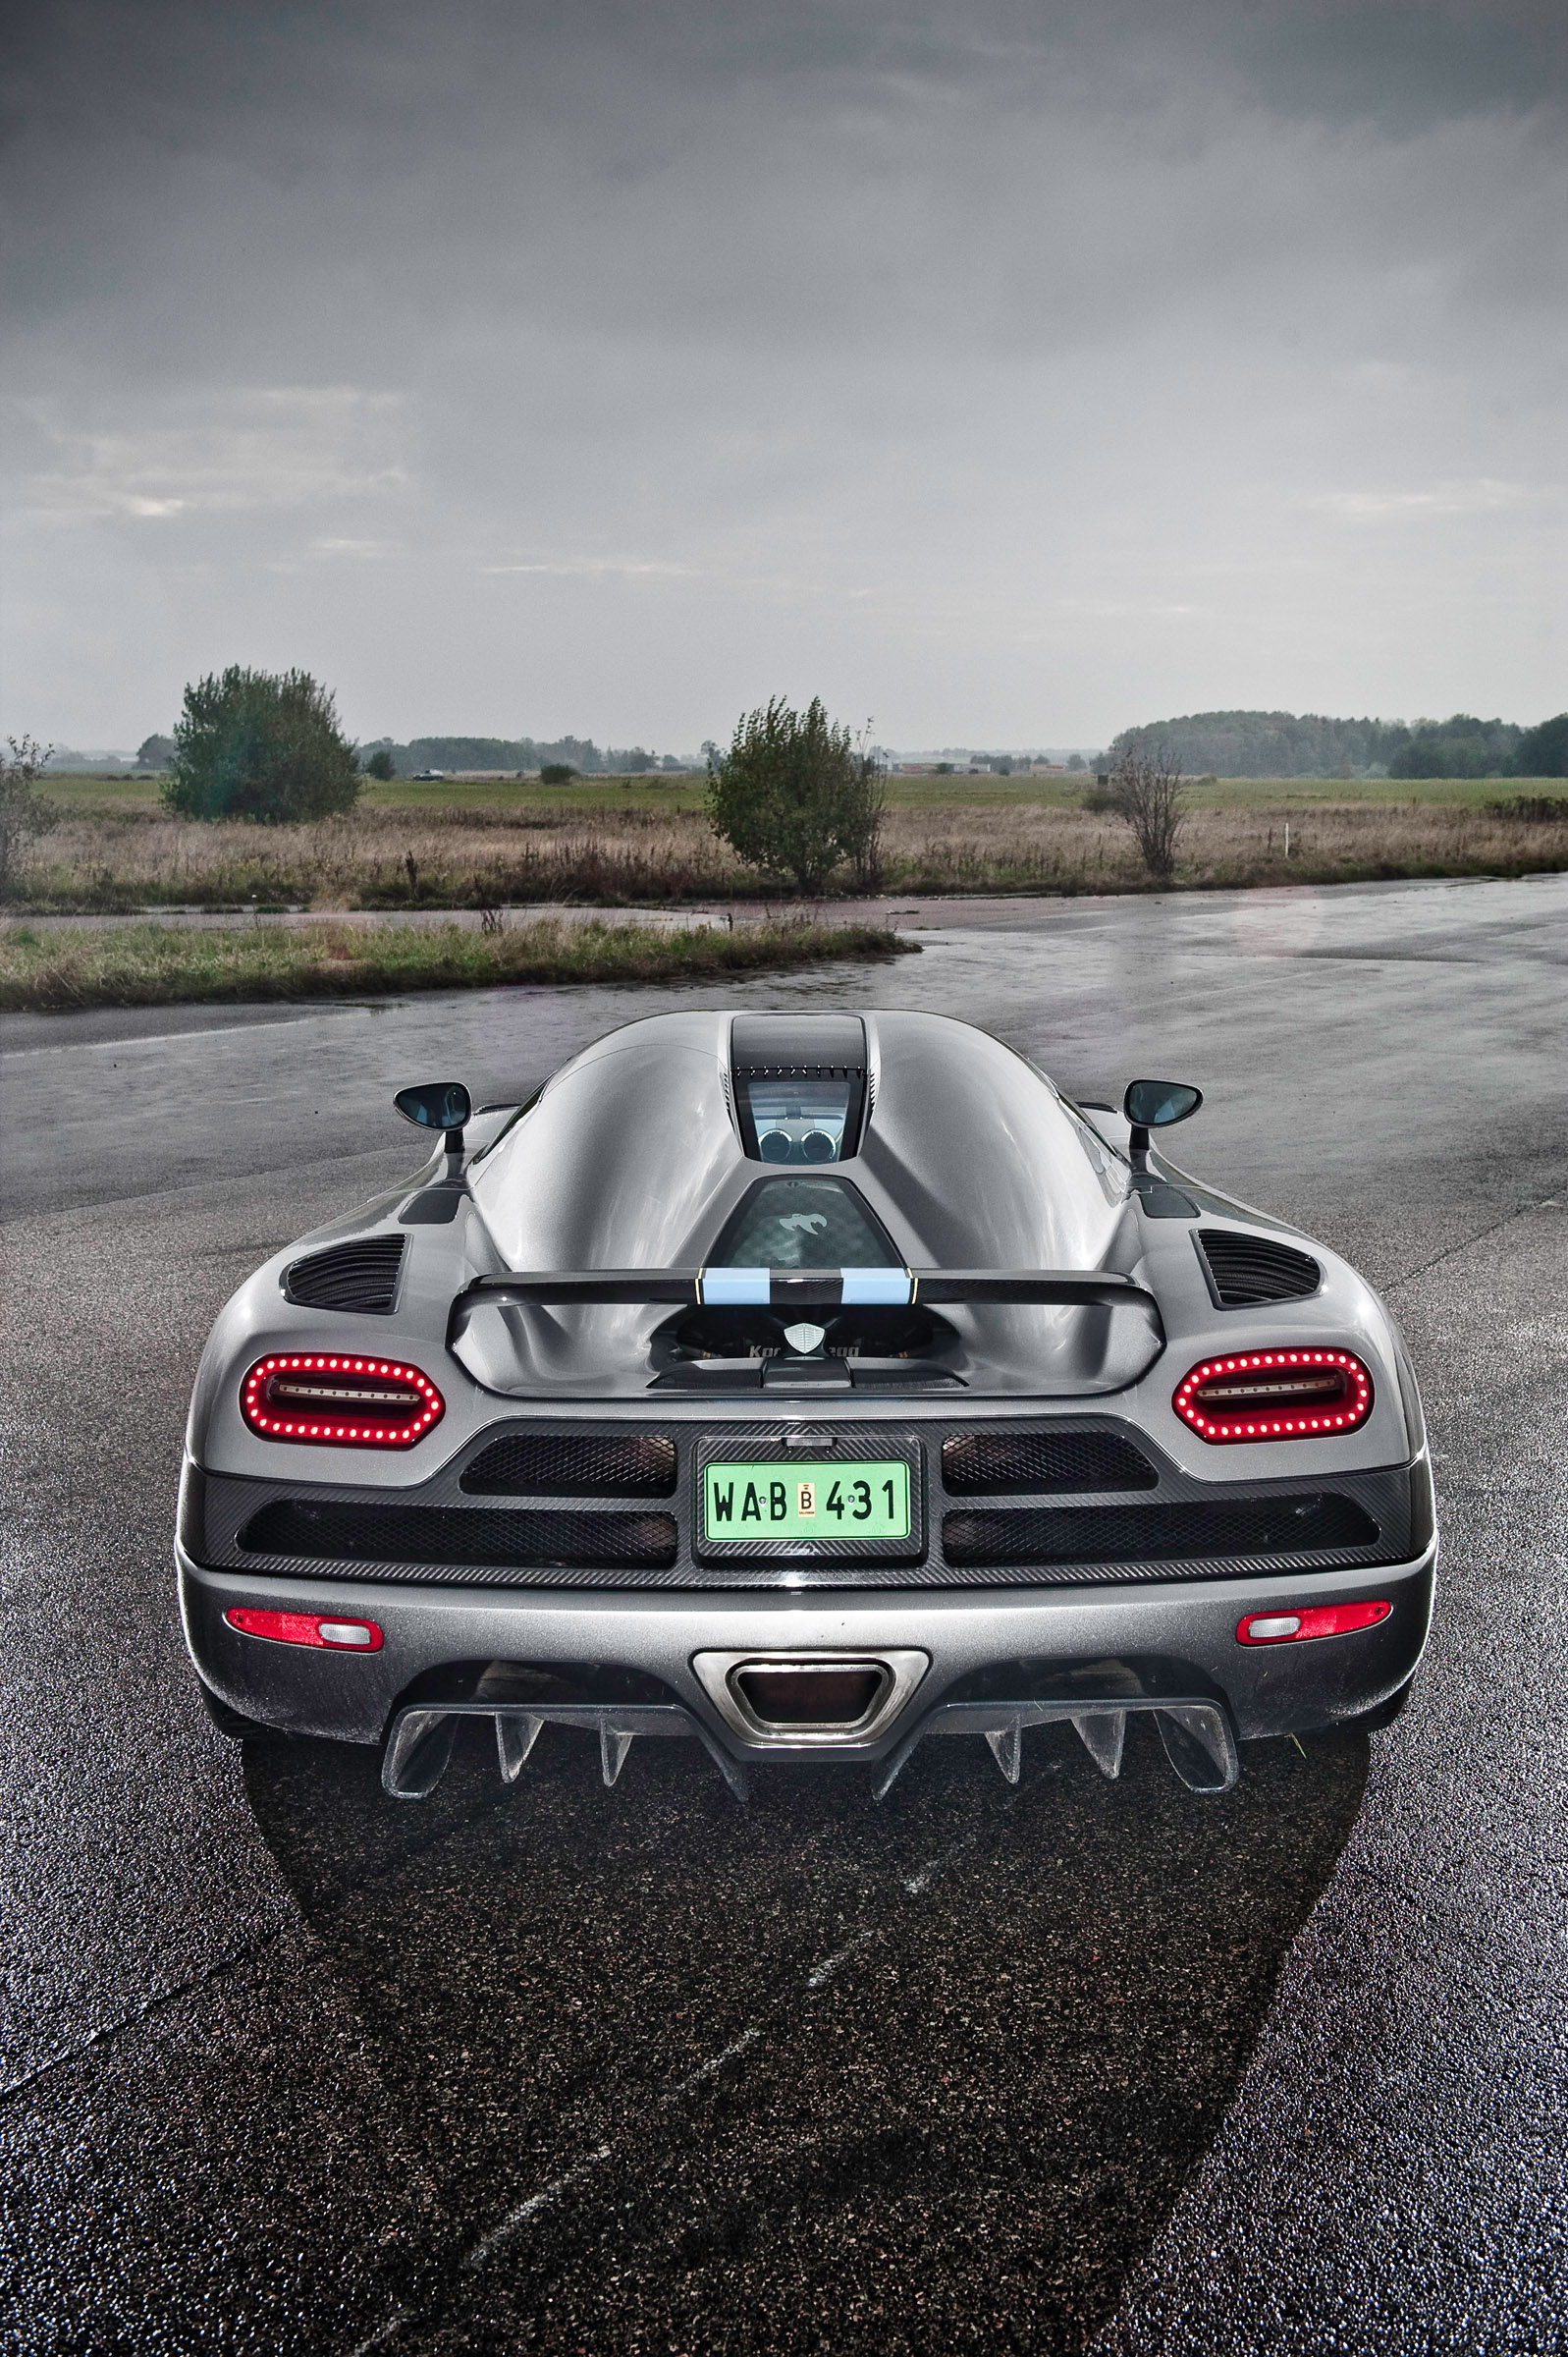 Koenigsegg Agera 2010 HD, Picture of speed, Automotive excellence, Captivating design, 1600x2400 HD Phone